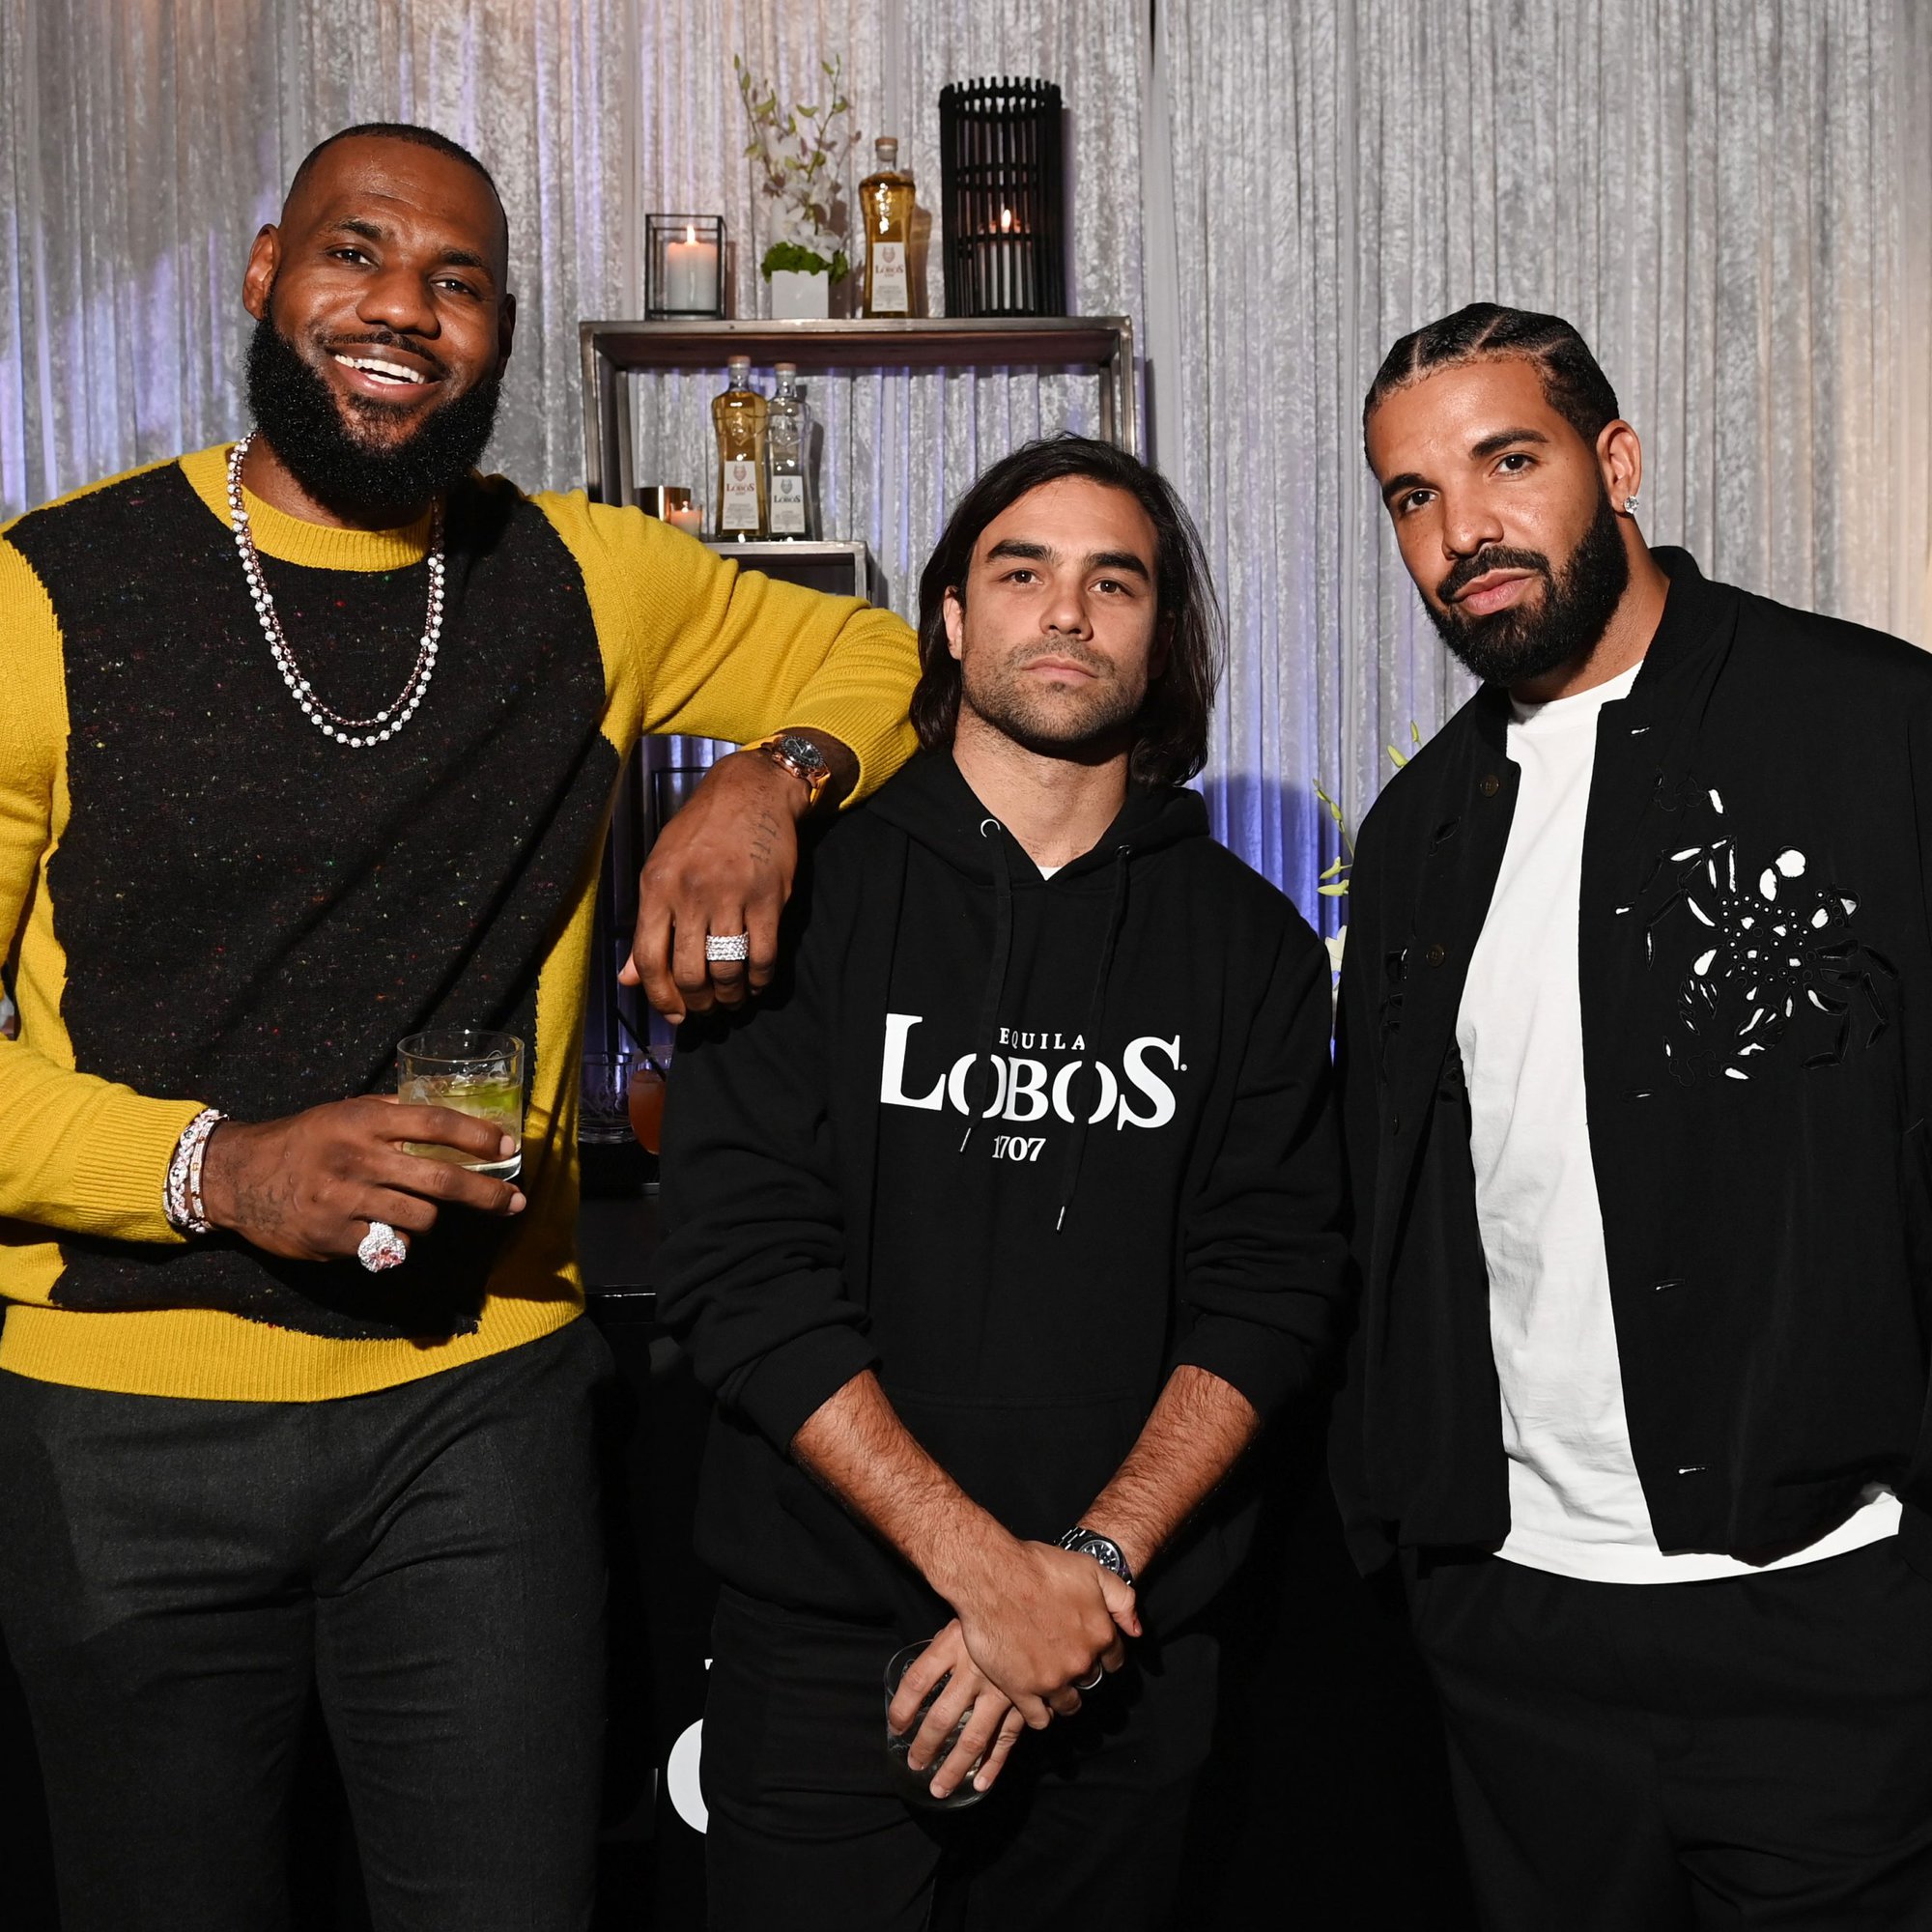 Lebron James, Diego, and Drake stand together posing at the LOBOS tequila launch.